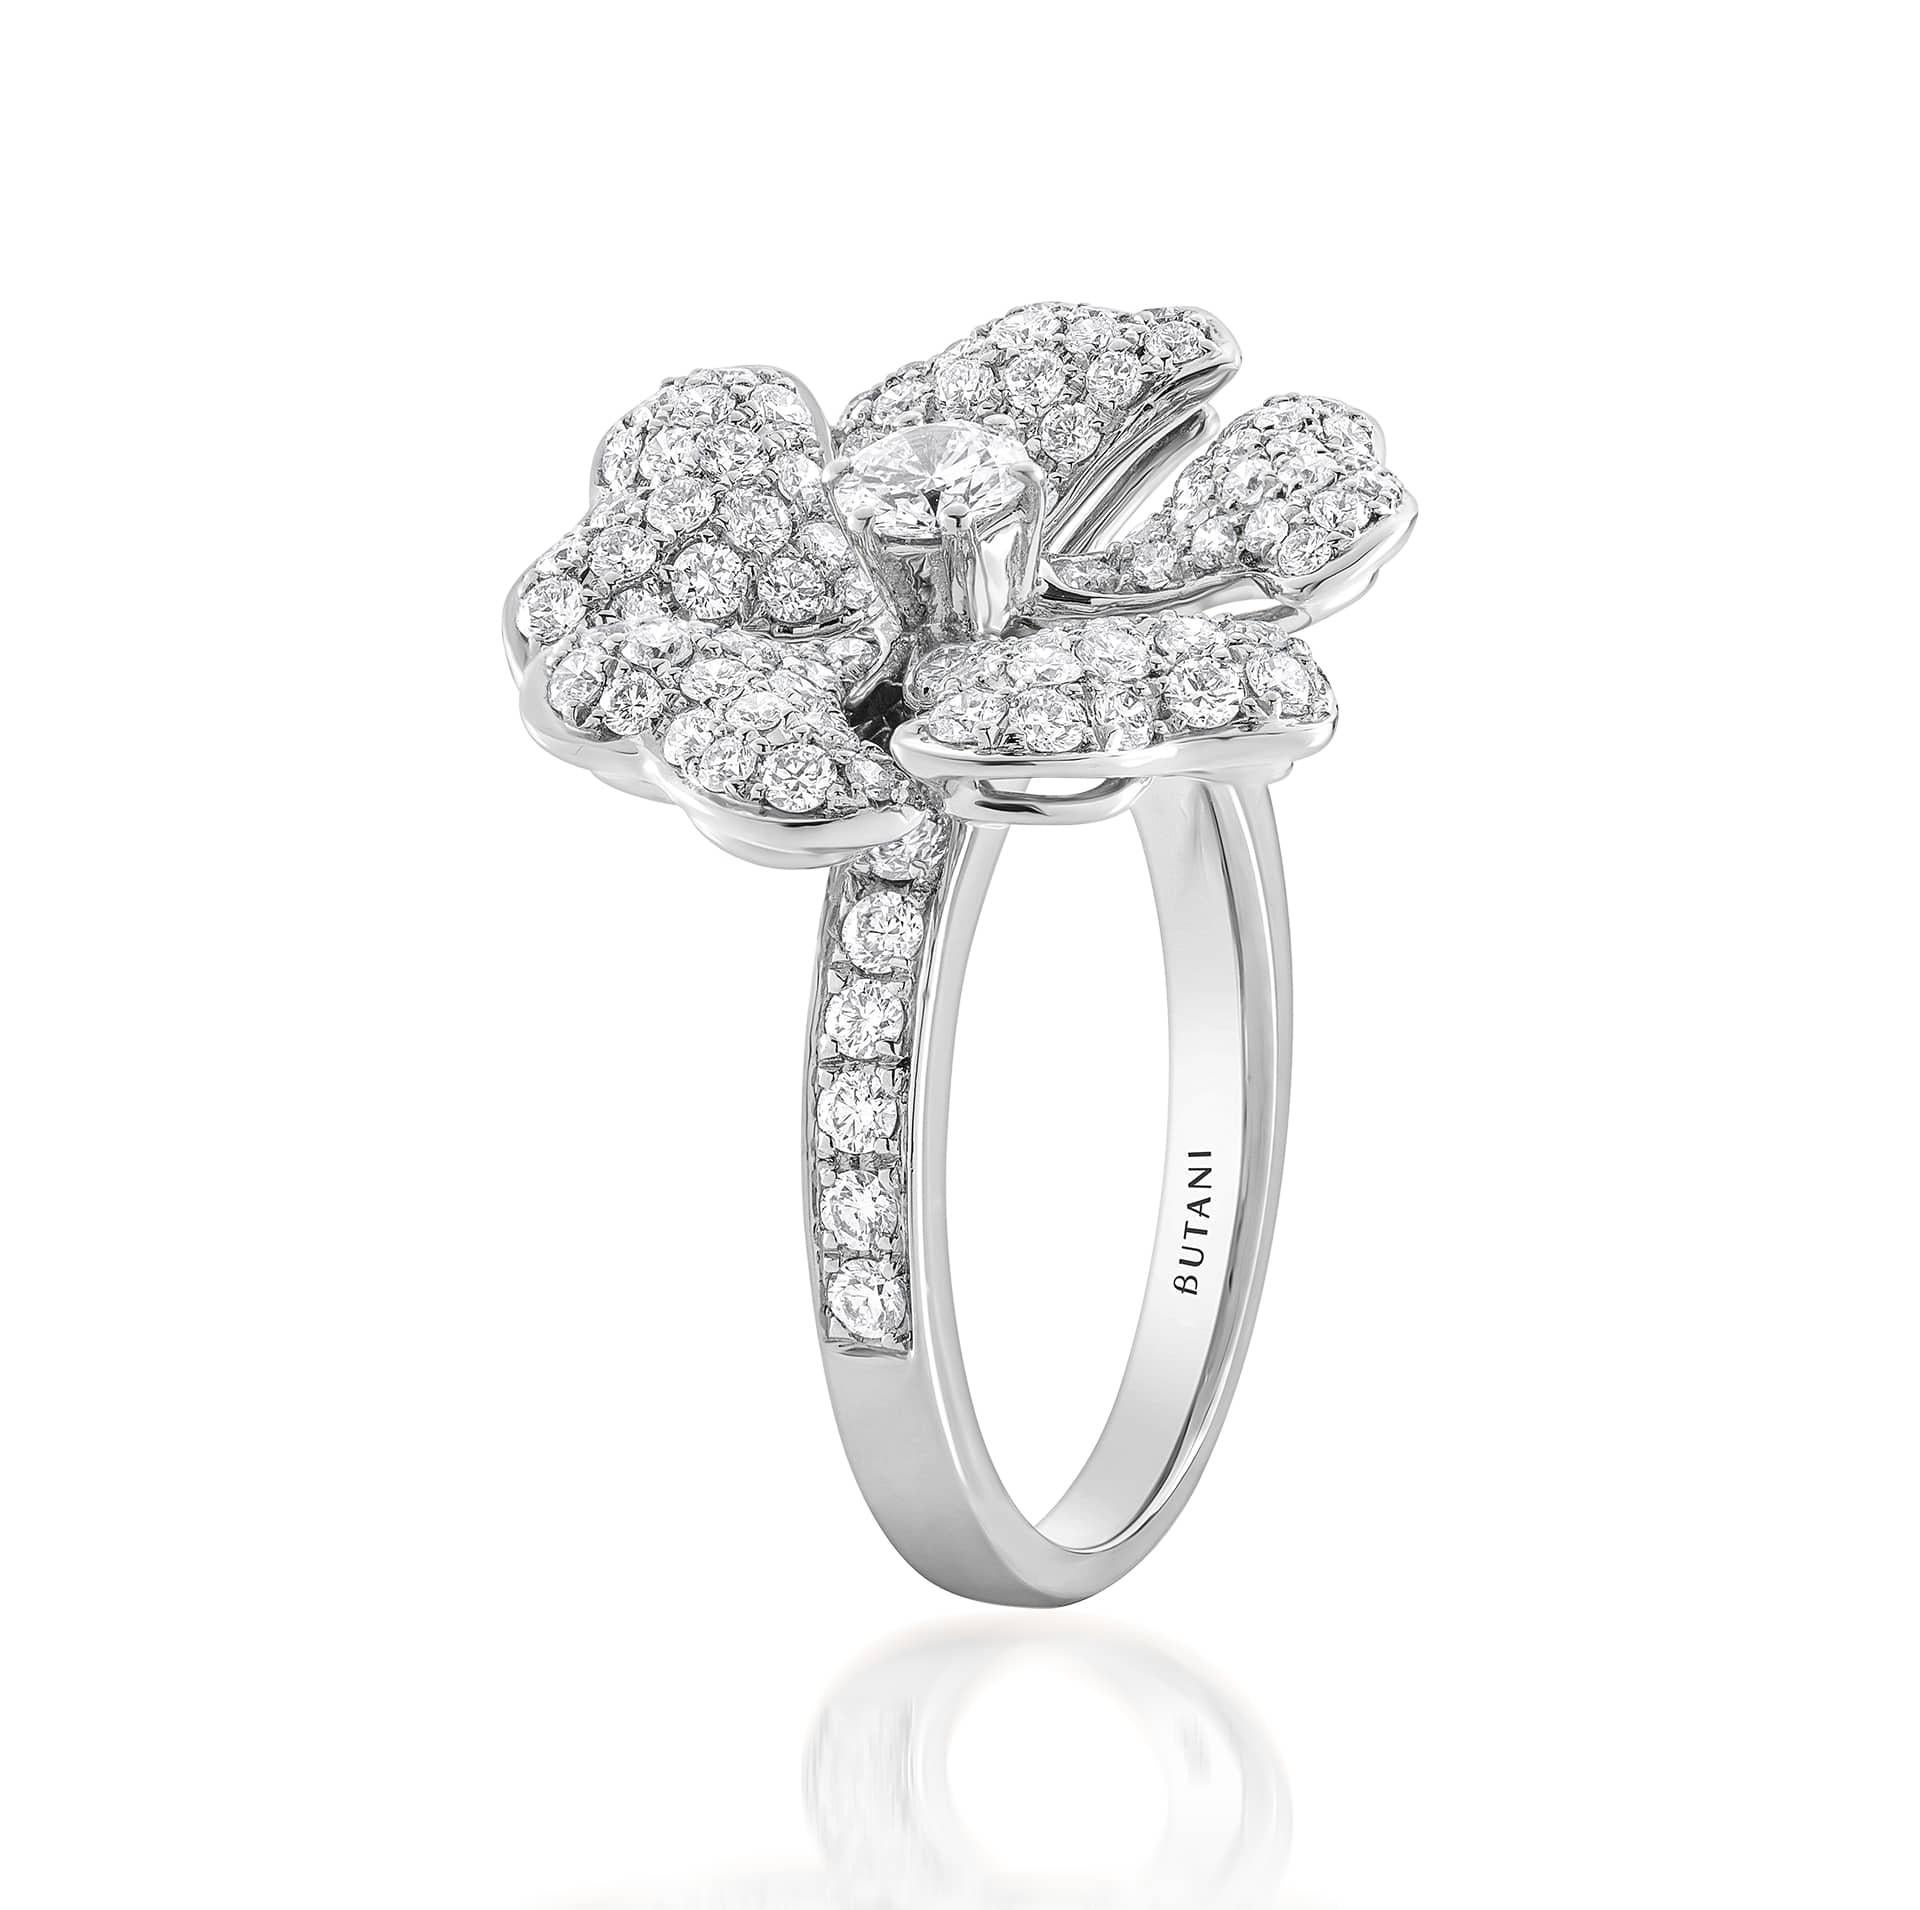 Bloom Gold and Pavé Diamond Ring in 18K White Gold

Inspired by the exquisite petals of the alpine cinquefoil flower, the Bloom collection combines the richness of diamonds and precious metals with the light versatility of this delicate,